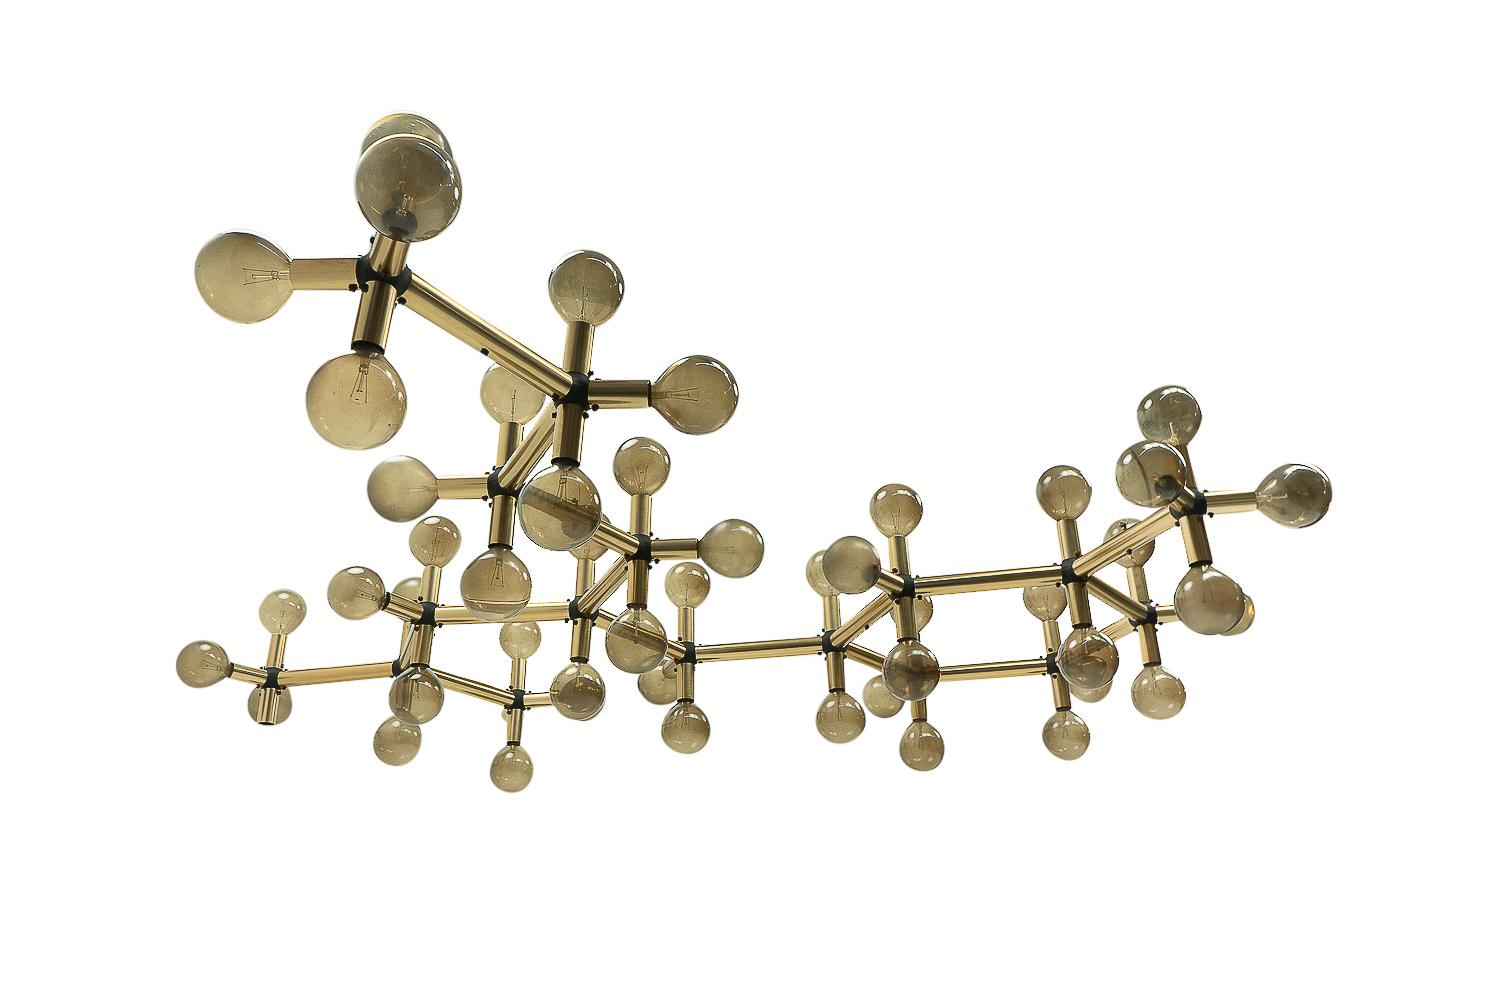 Swiss Design Classic Atomic Chandelier by Haussmann for Swisslamps Int, 1960s For Sale 6